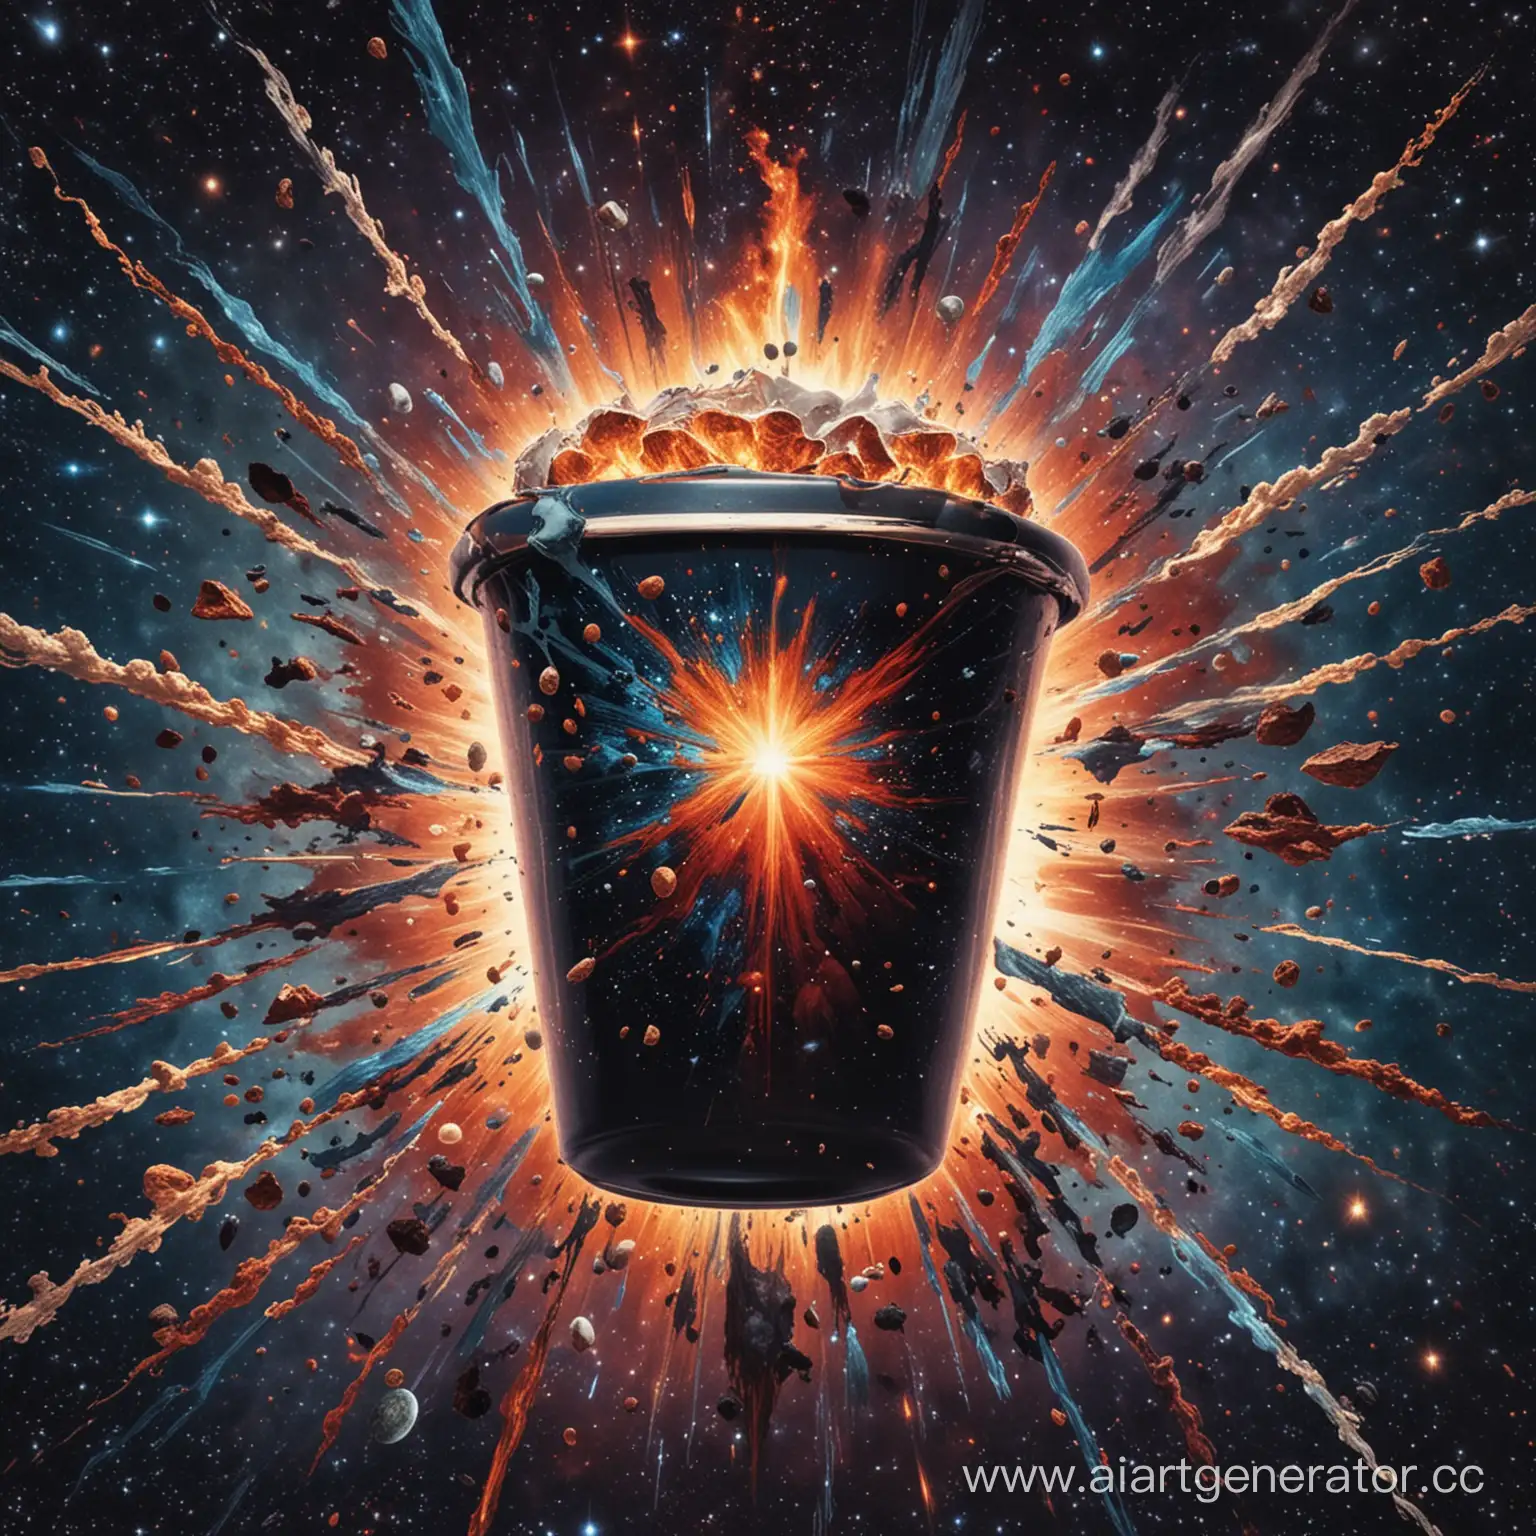 The cup that took over the universe exploded